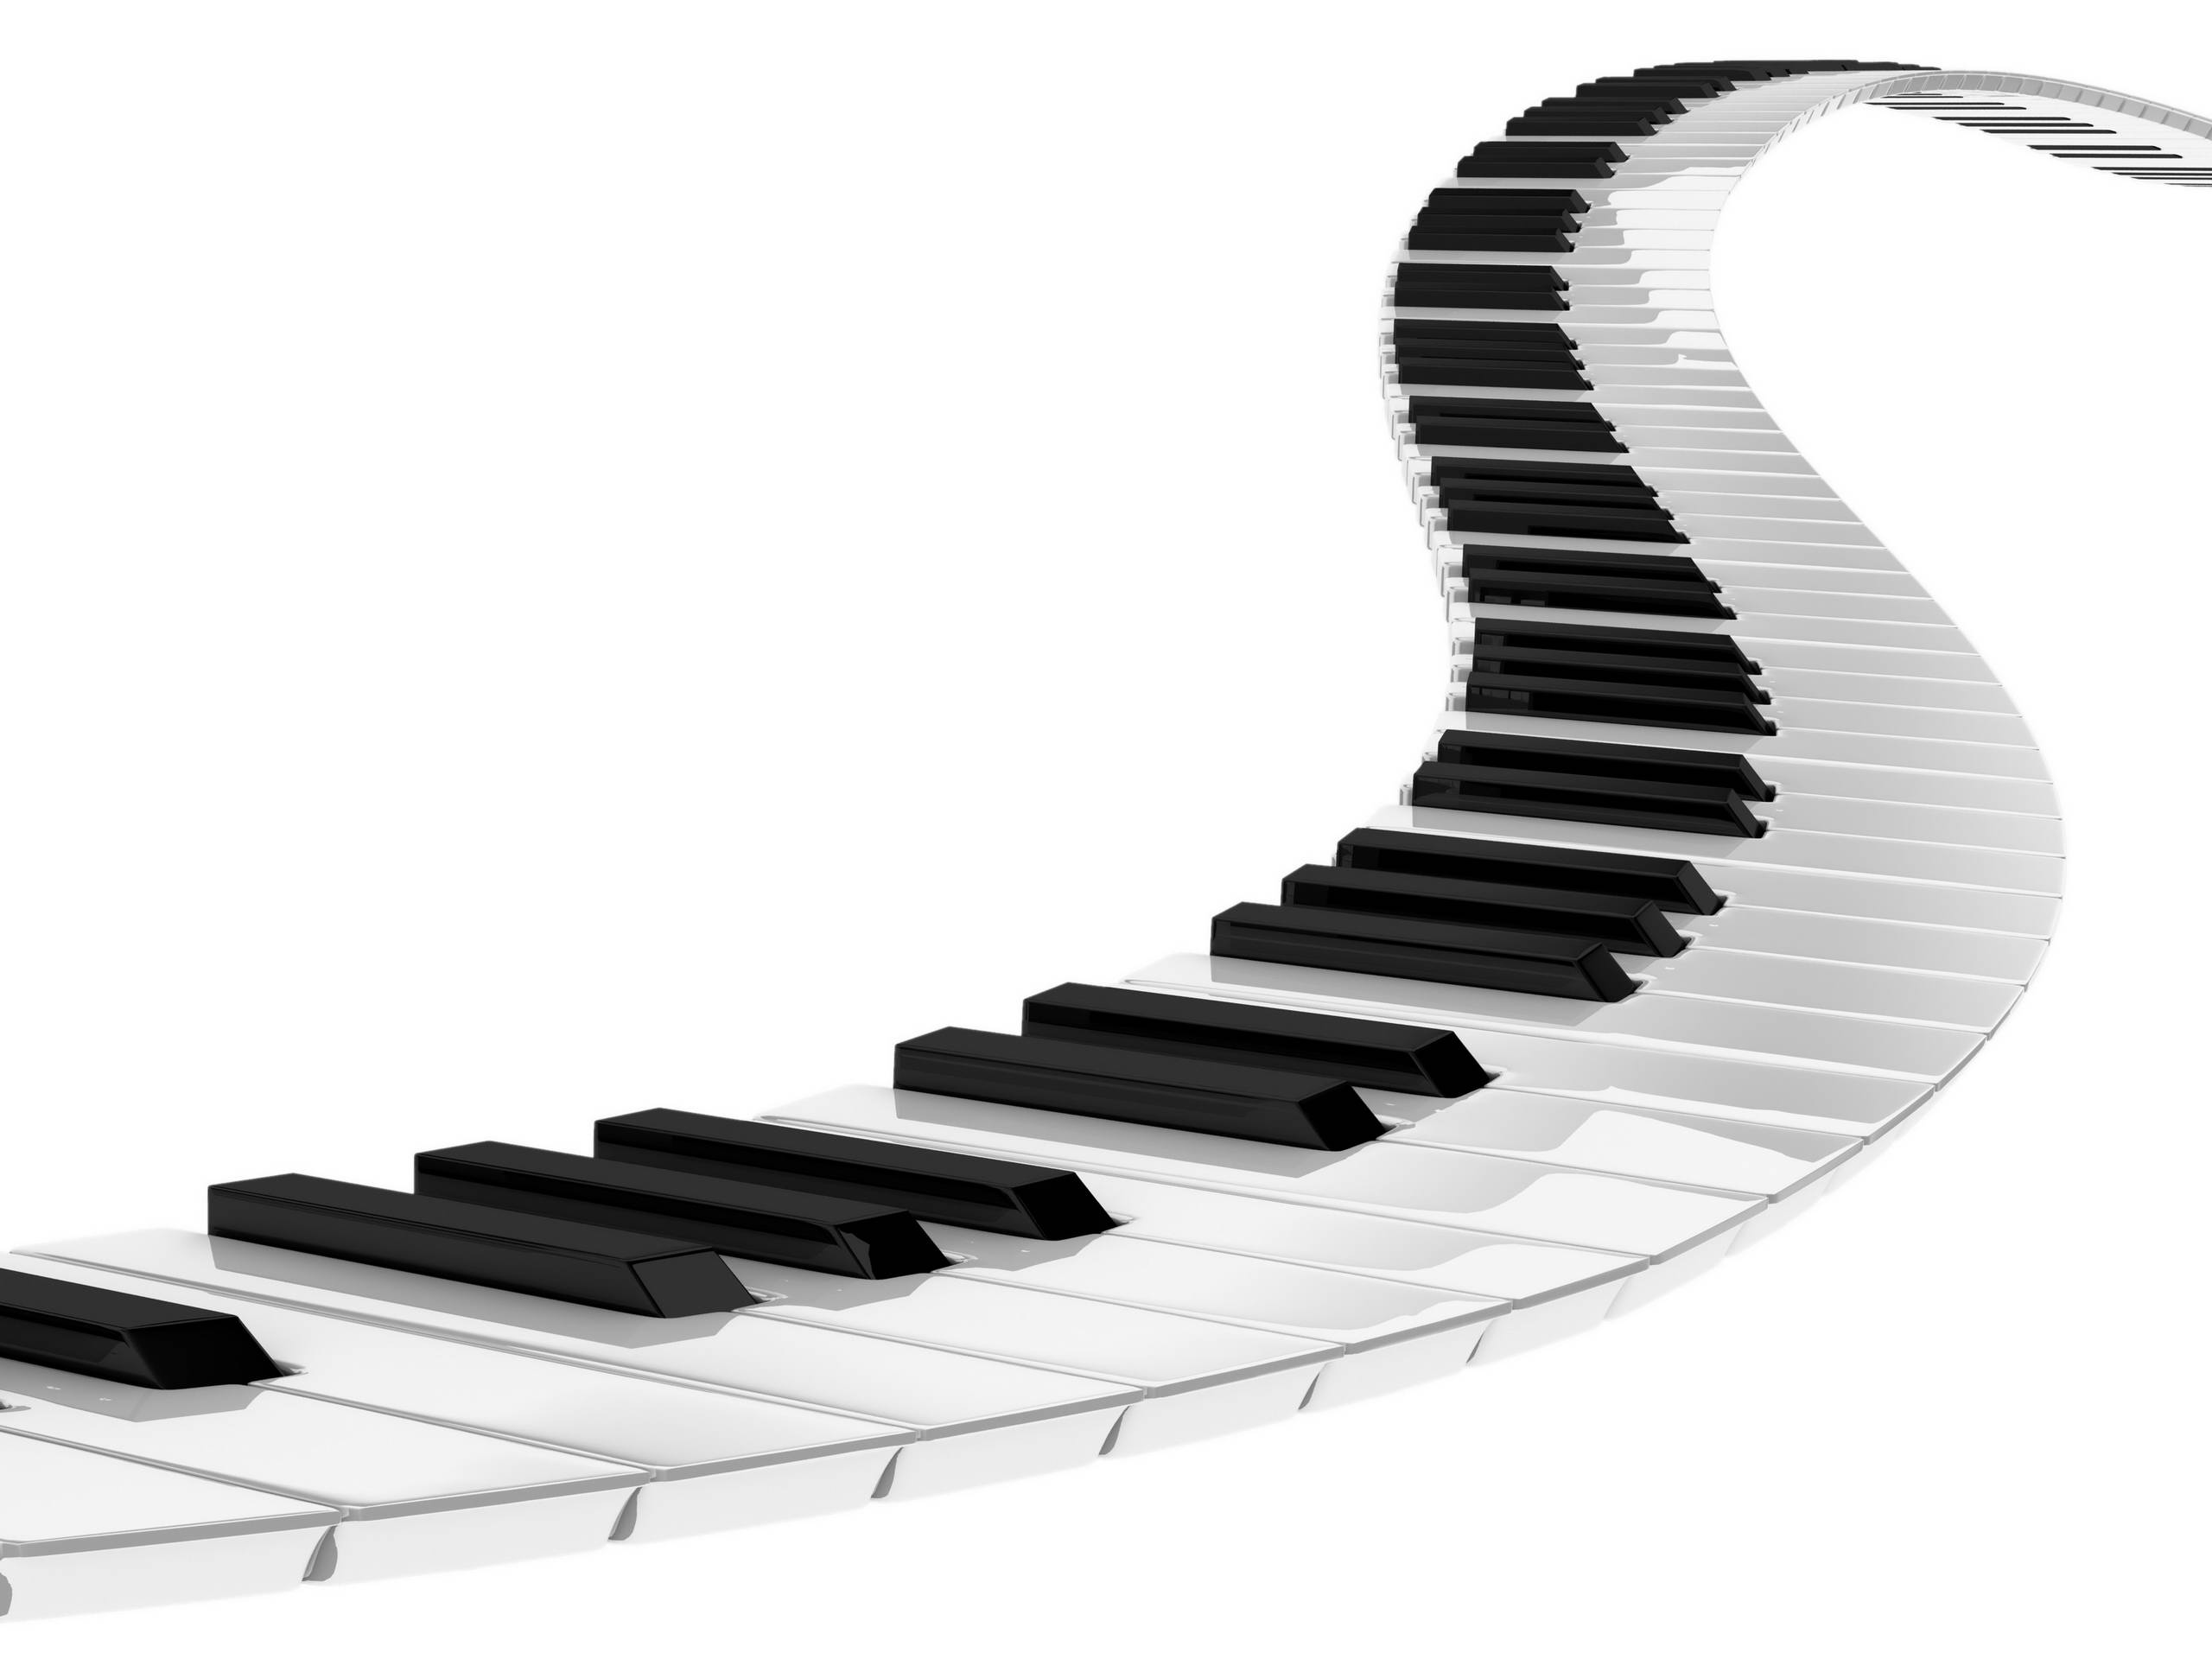 Piano Keys Images - Cliparts.co